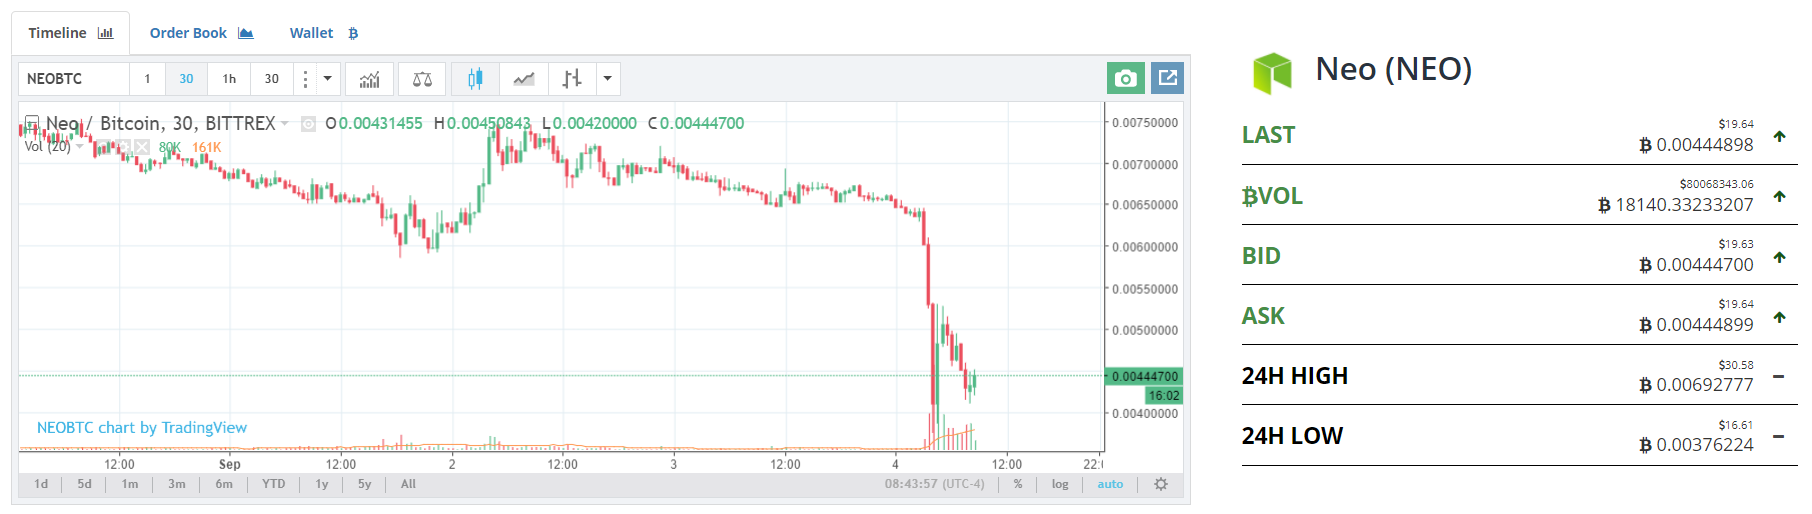 neo-china-cans-ico-crypto-currency-markets-tumble.png